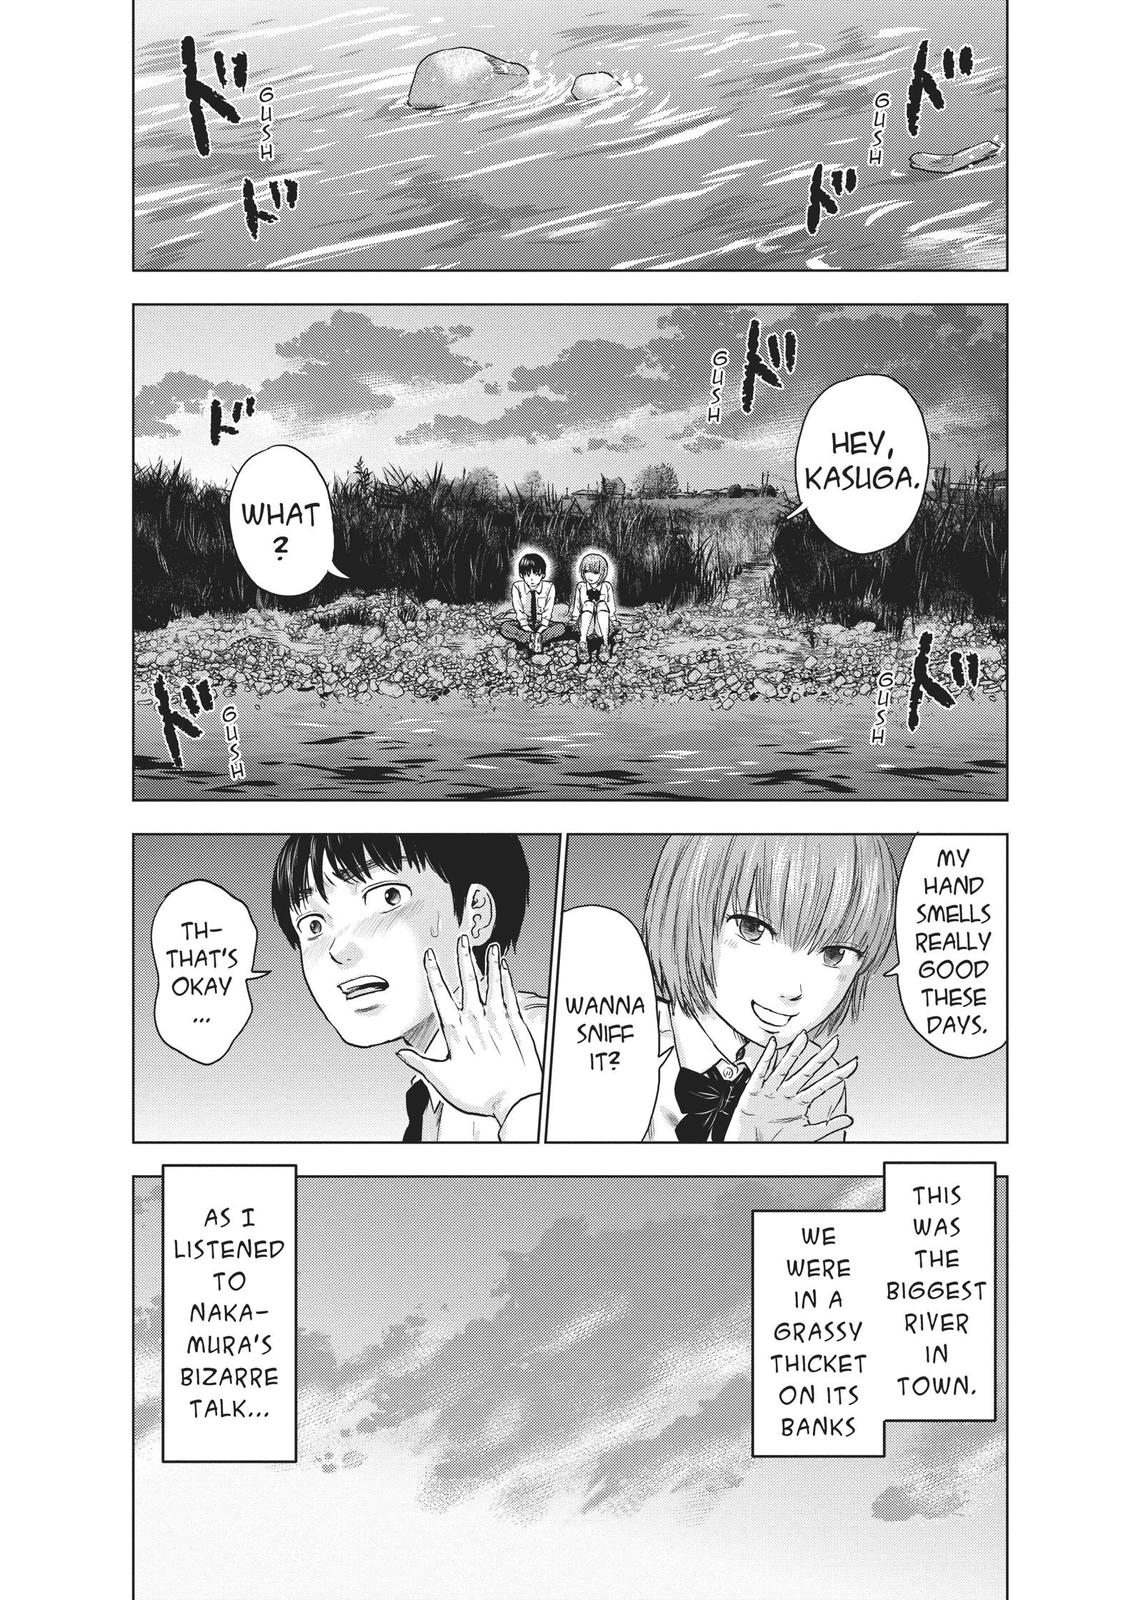 The Flowers of Evil, Chapter 4 - The Flowers of Evil Manga Online